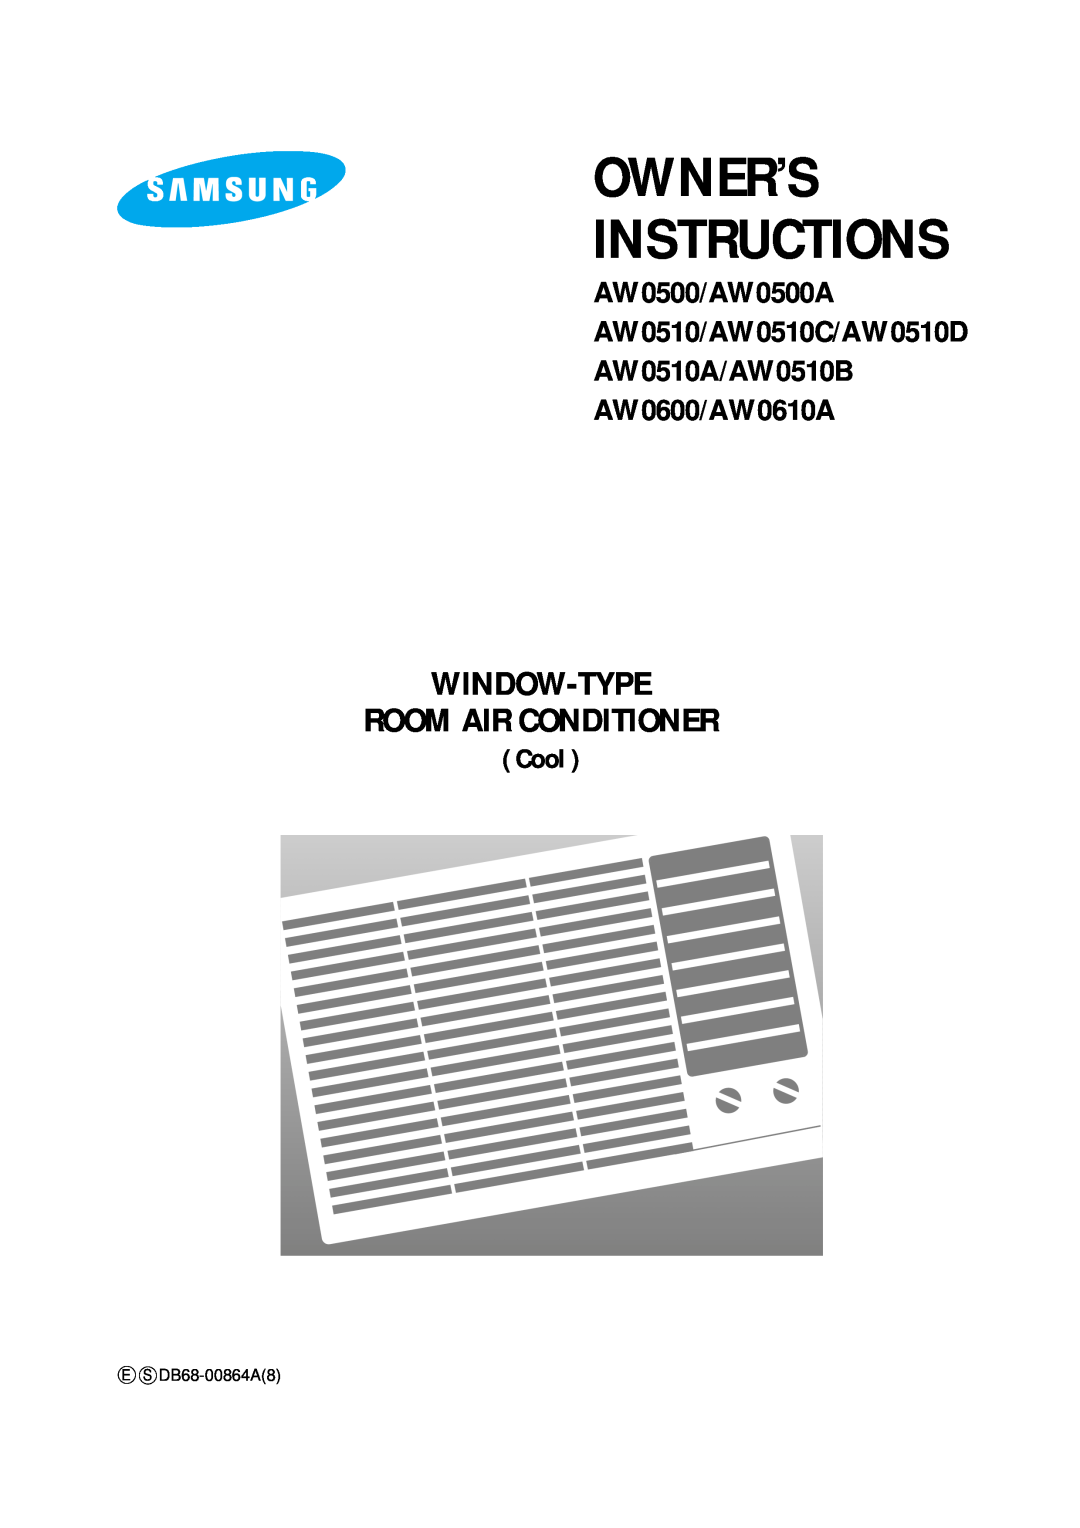 Samsung AW0510B manual Owner’S Instructions, Window-Type Room Air Conditioner, AW0500/AW0500A AW0510/AW0510C/AW0510D, Cool 